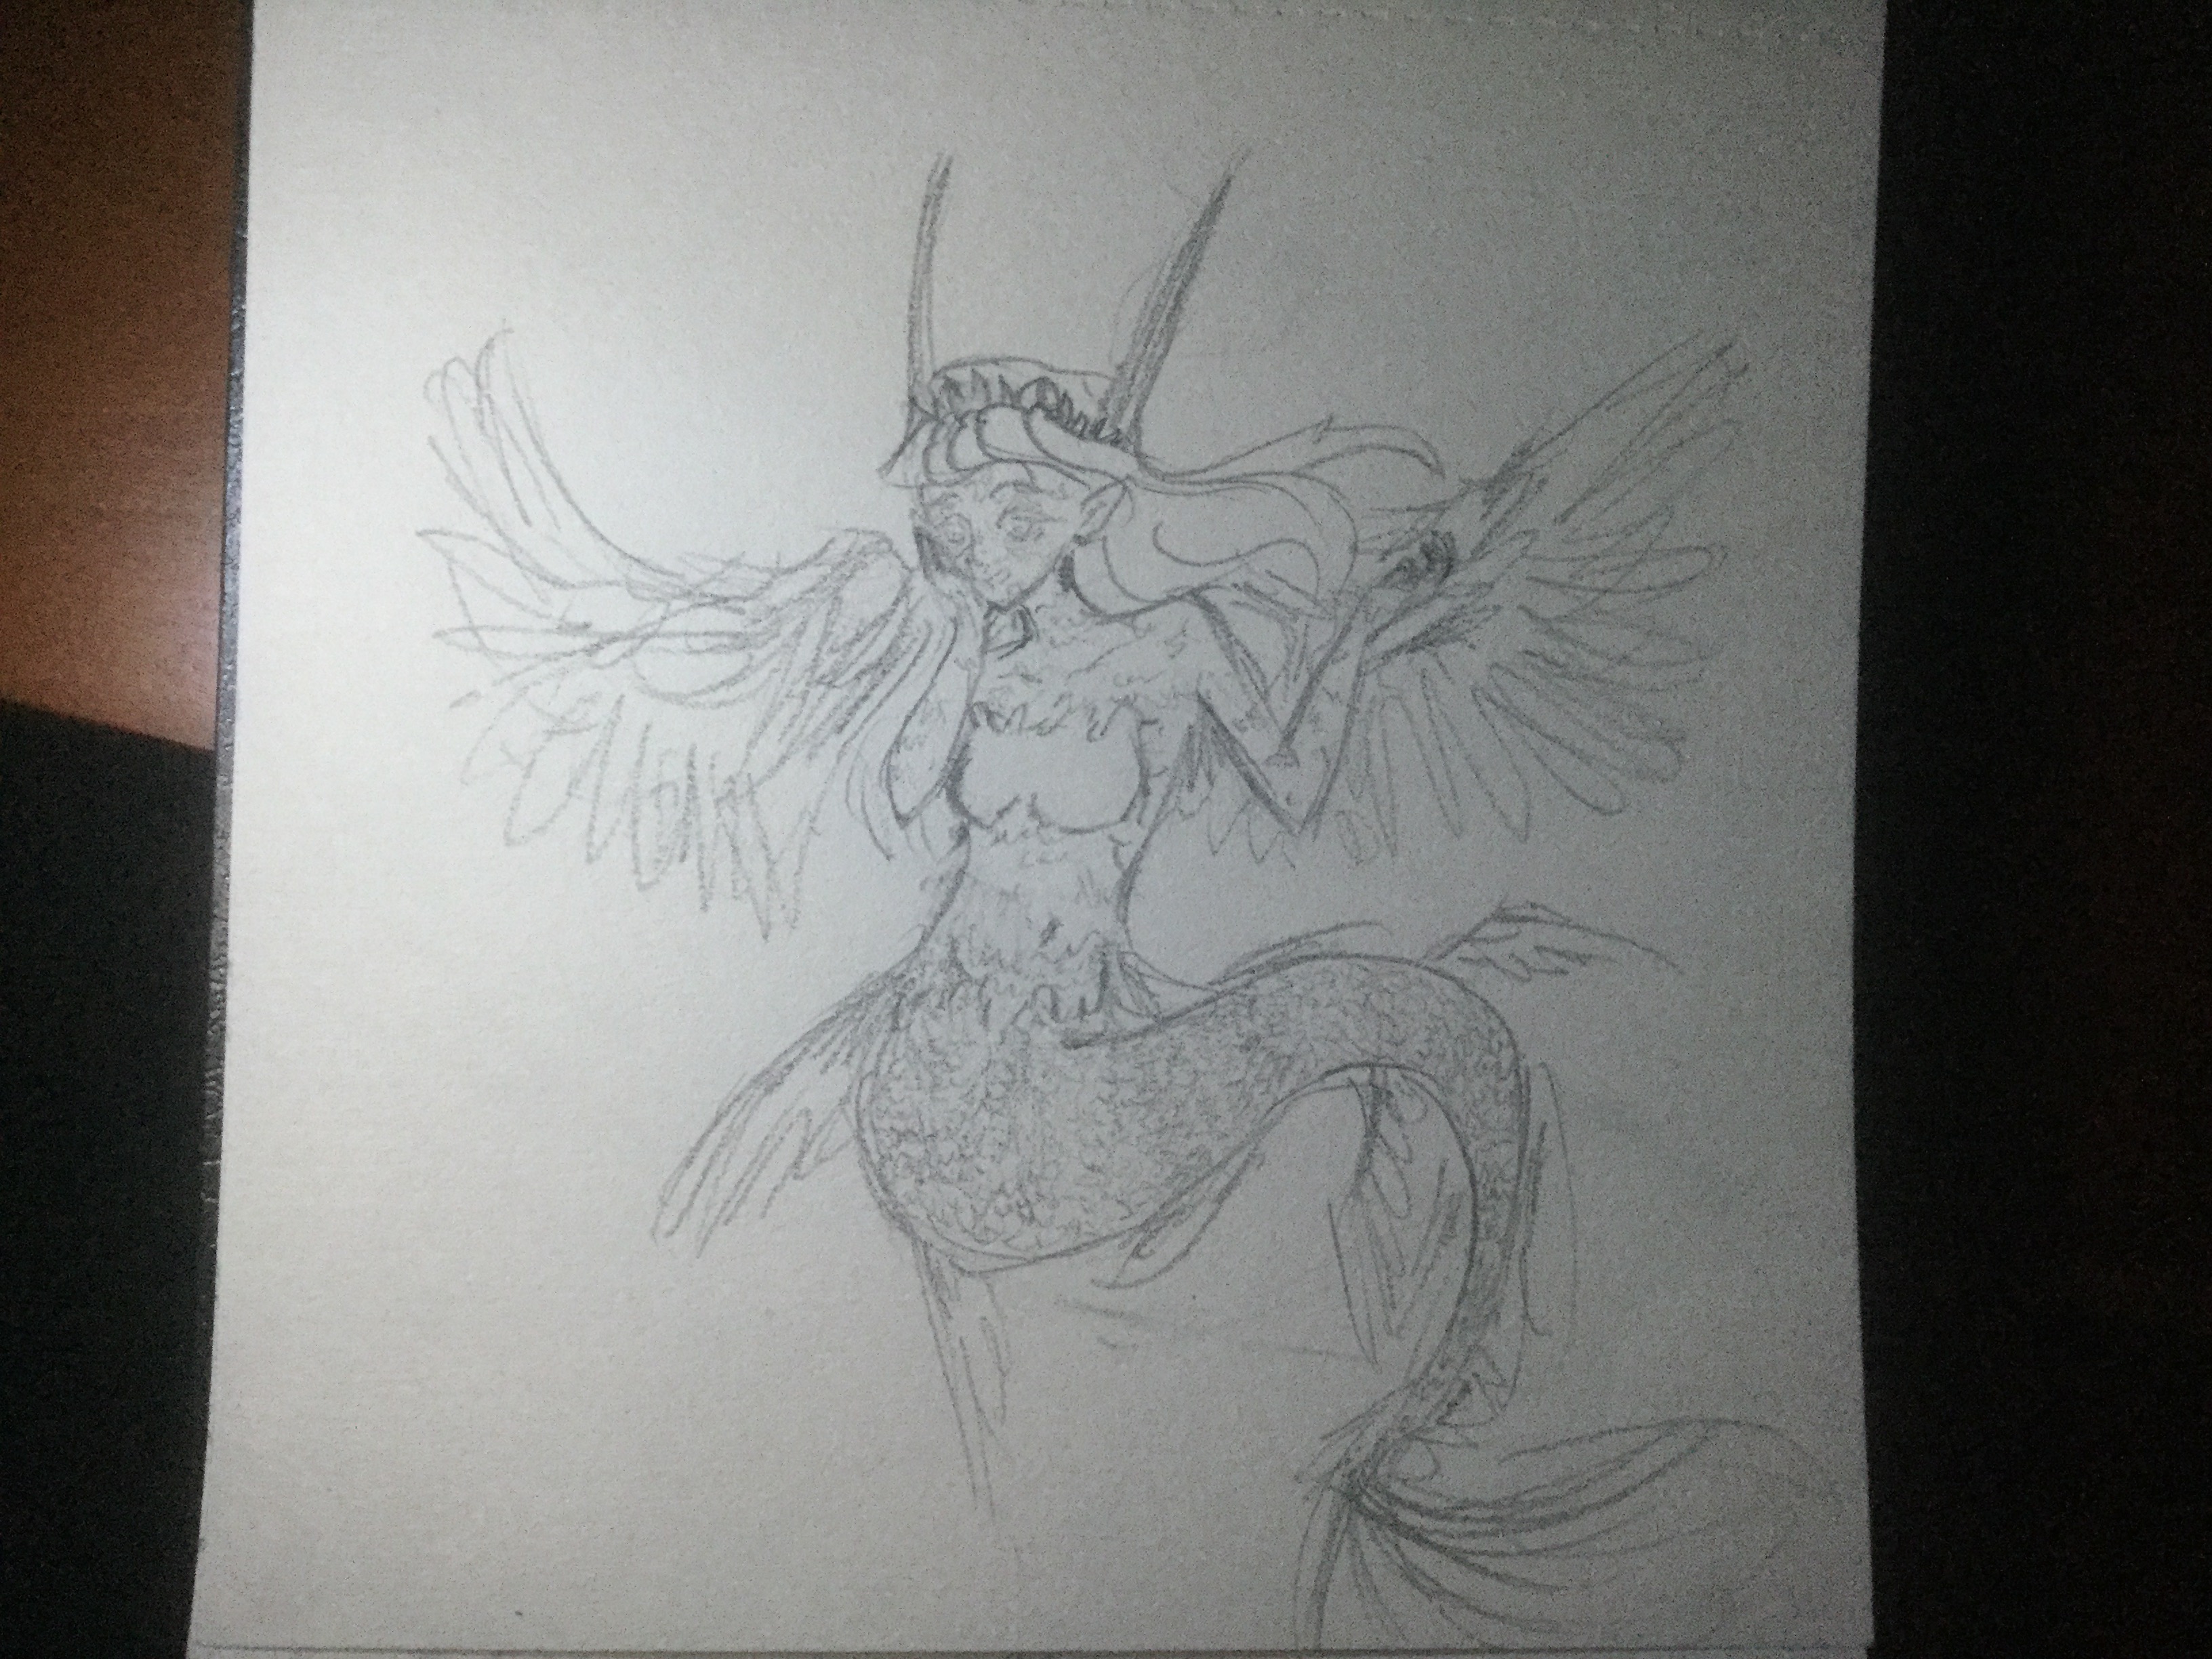 It's a mermaid! I like to draw mermaids with lots of fins. The wing looking things are indeed fins a ...